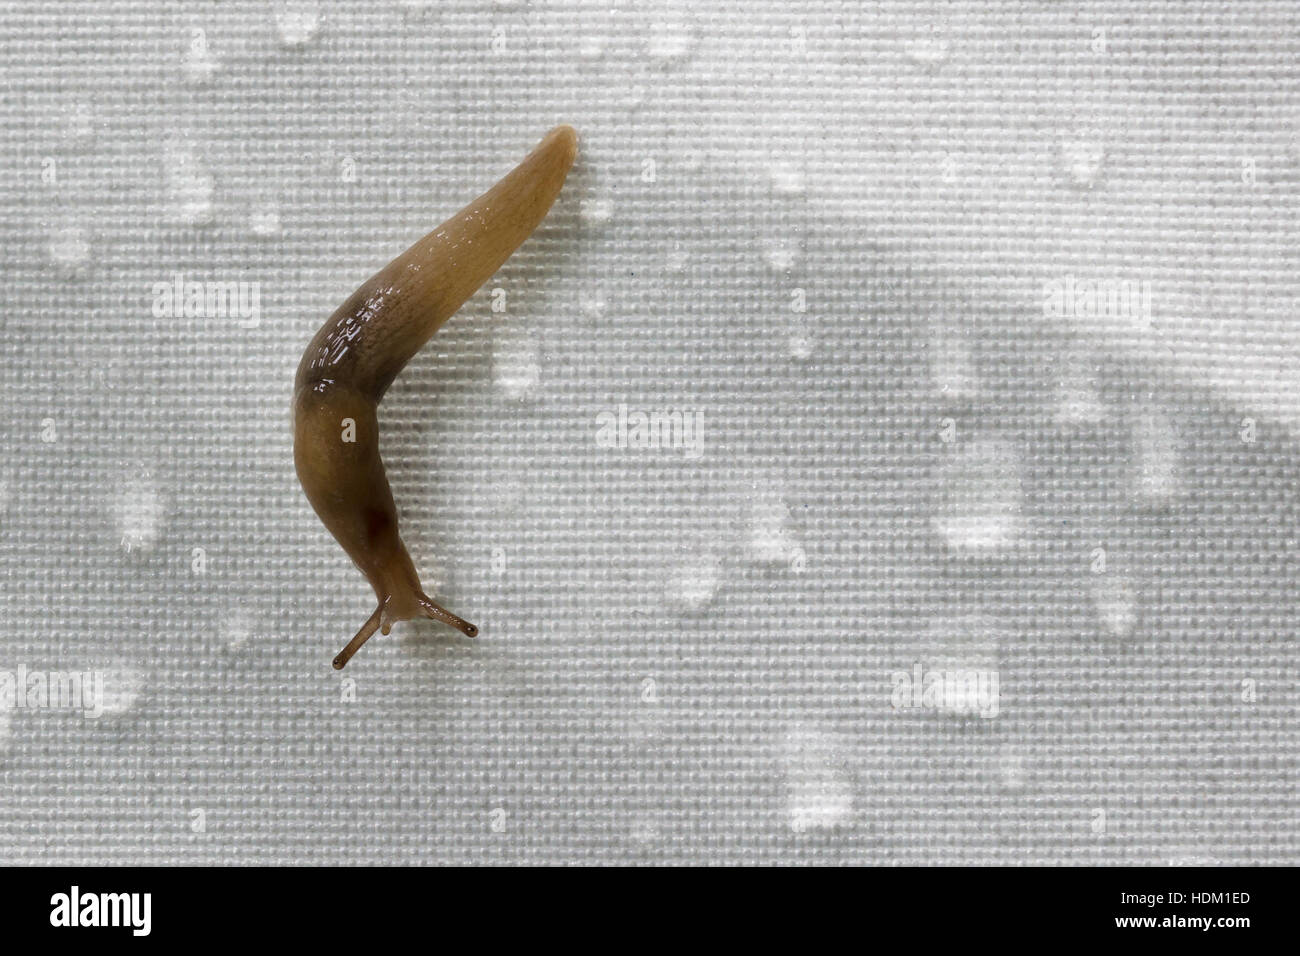 Snail on synthetic fabric with rain drops. Concept of coexistence between natural world and man made objects Stock Photo